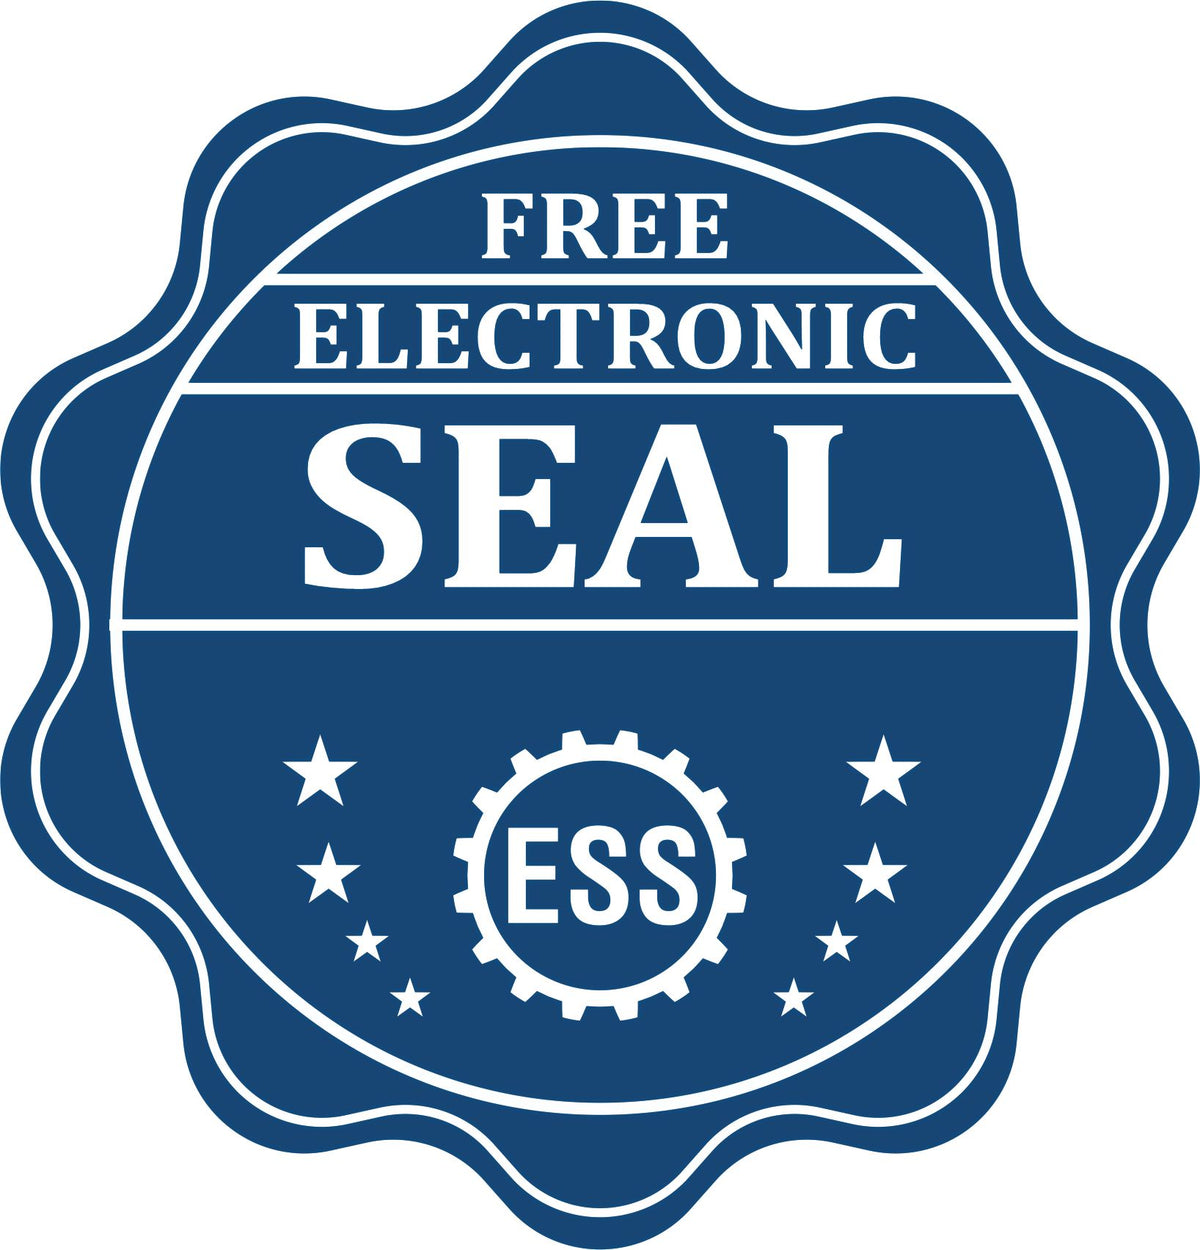 A badge showing a free electronic seal for the Slim Pre-Inked Colorado Land Surveyor Seal Stamp with stars and the ESS gear on the emblem.